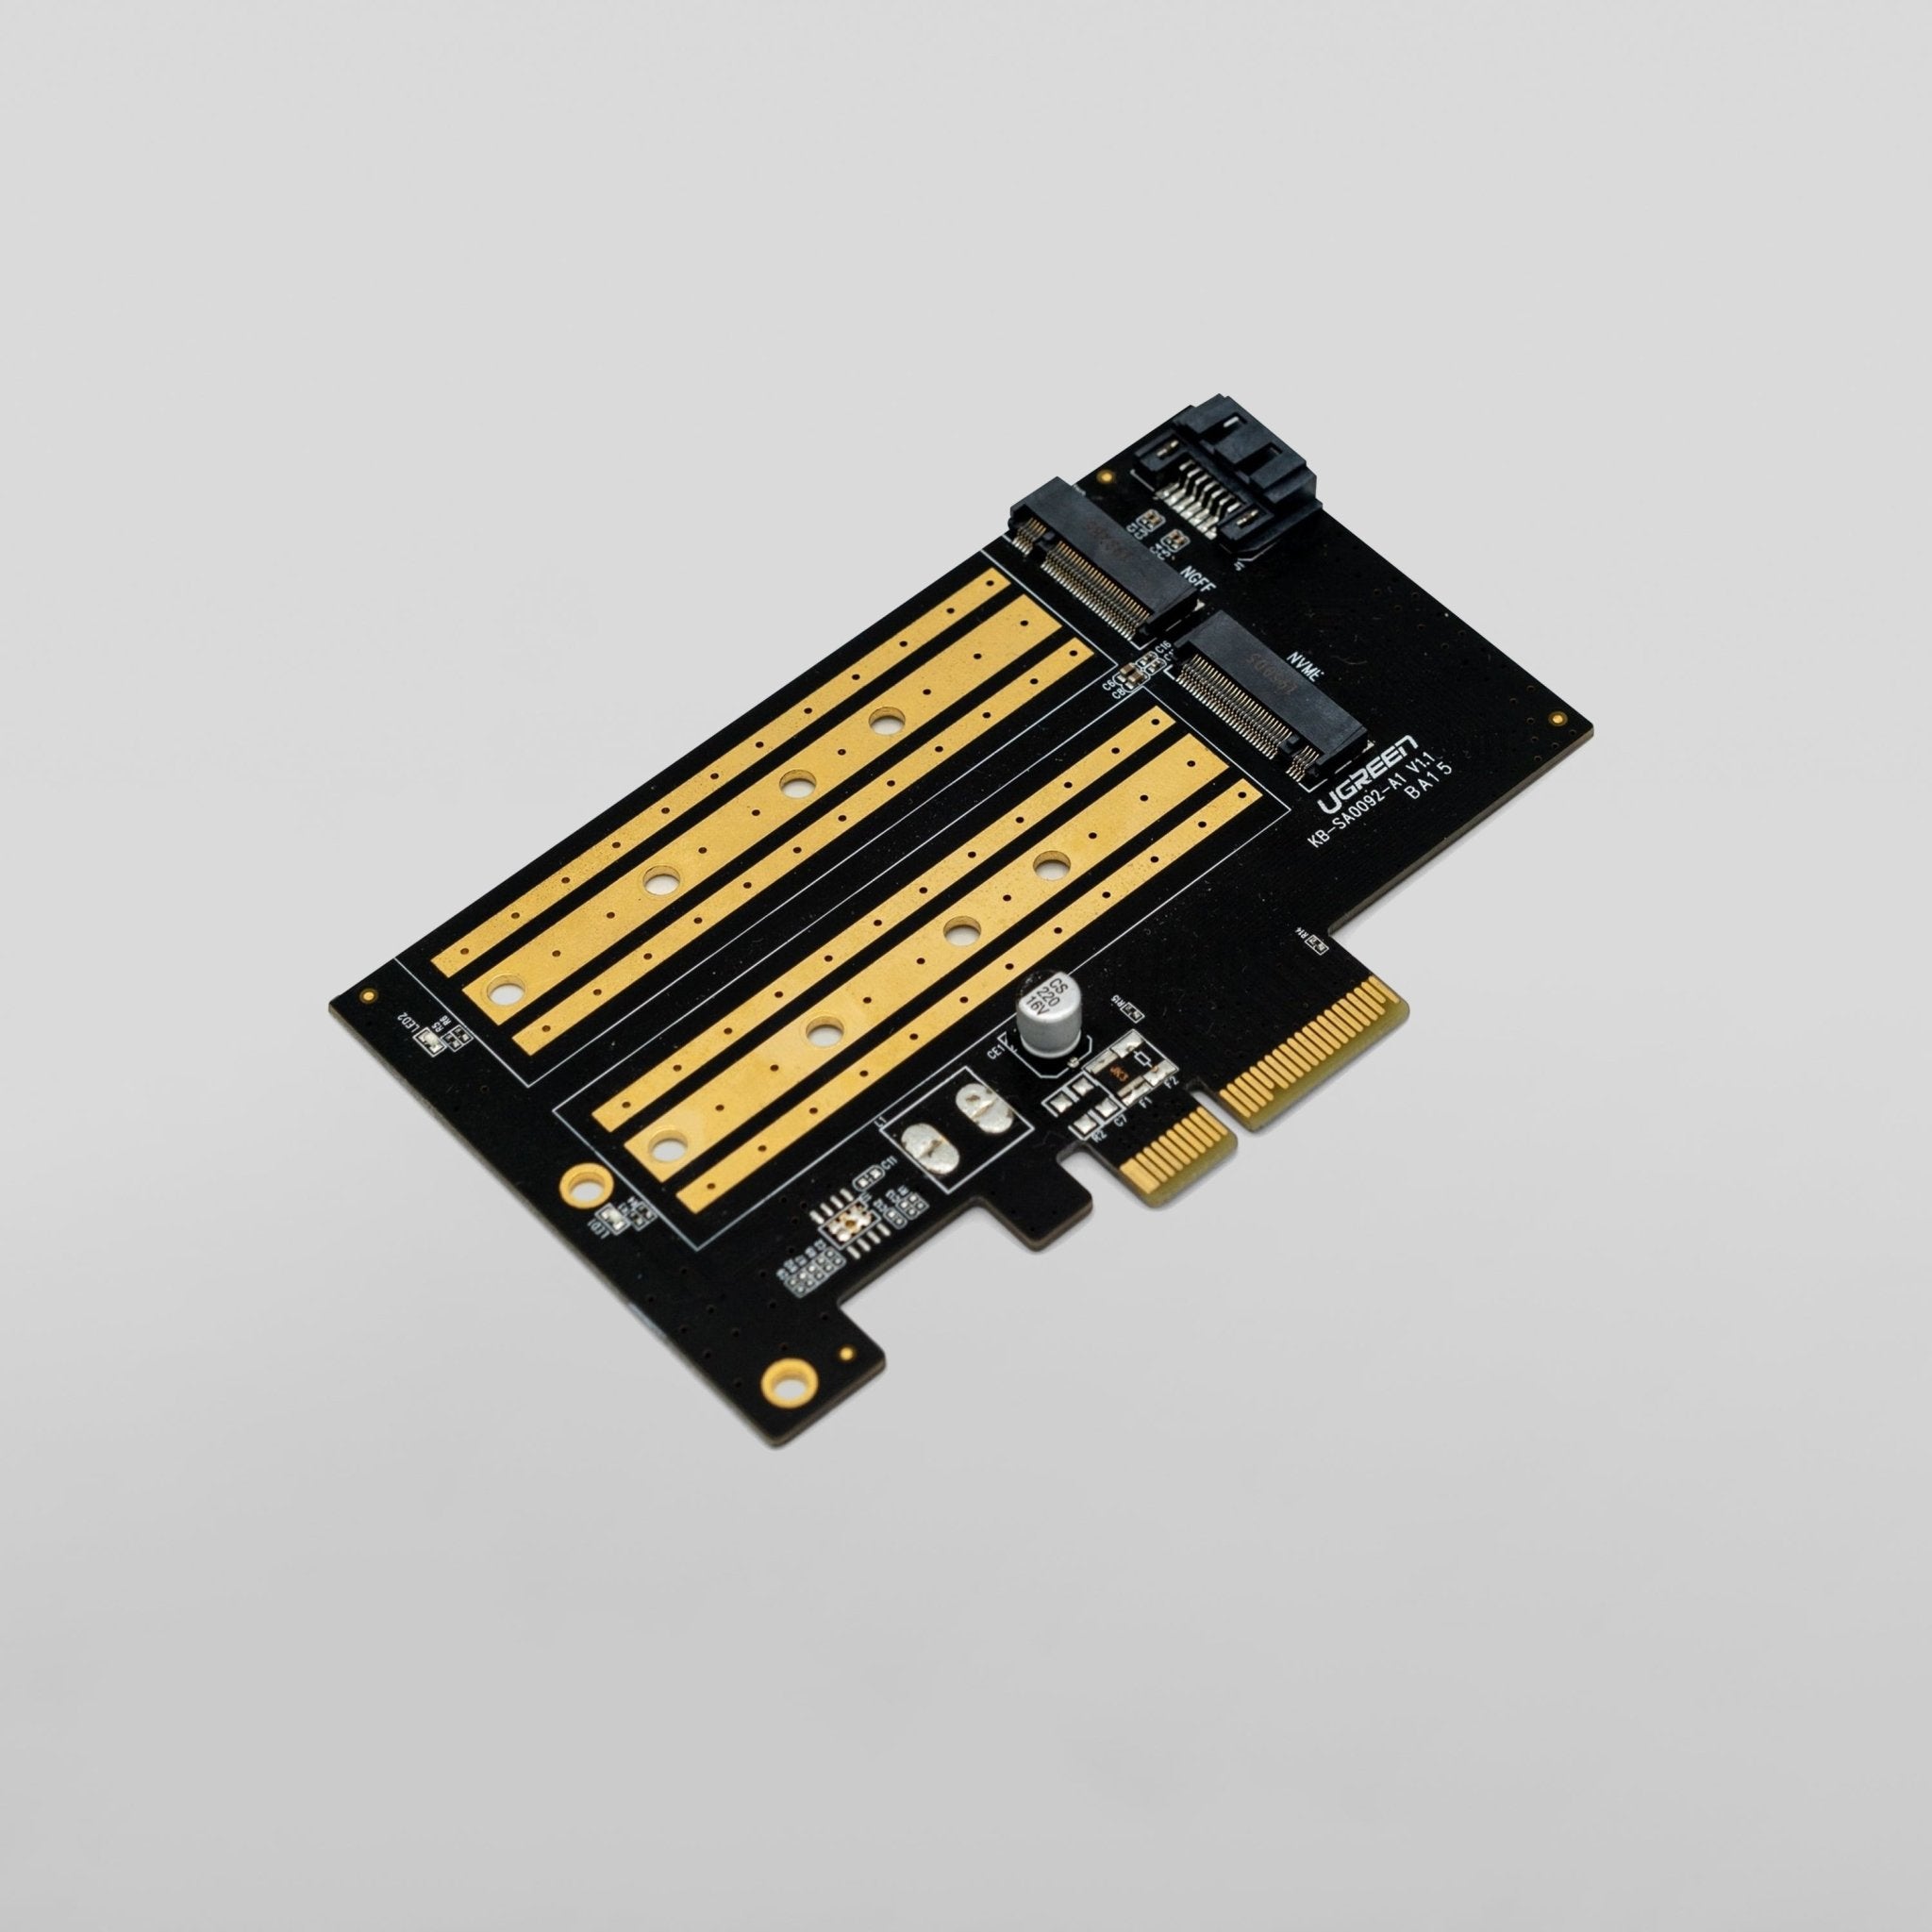 PCIe to NVMe & NGFF SSD Adapter - Zima Store Online